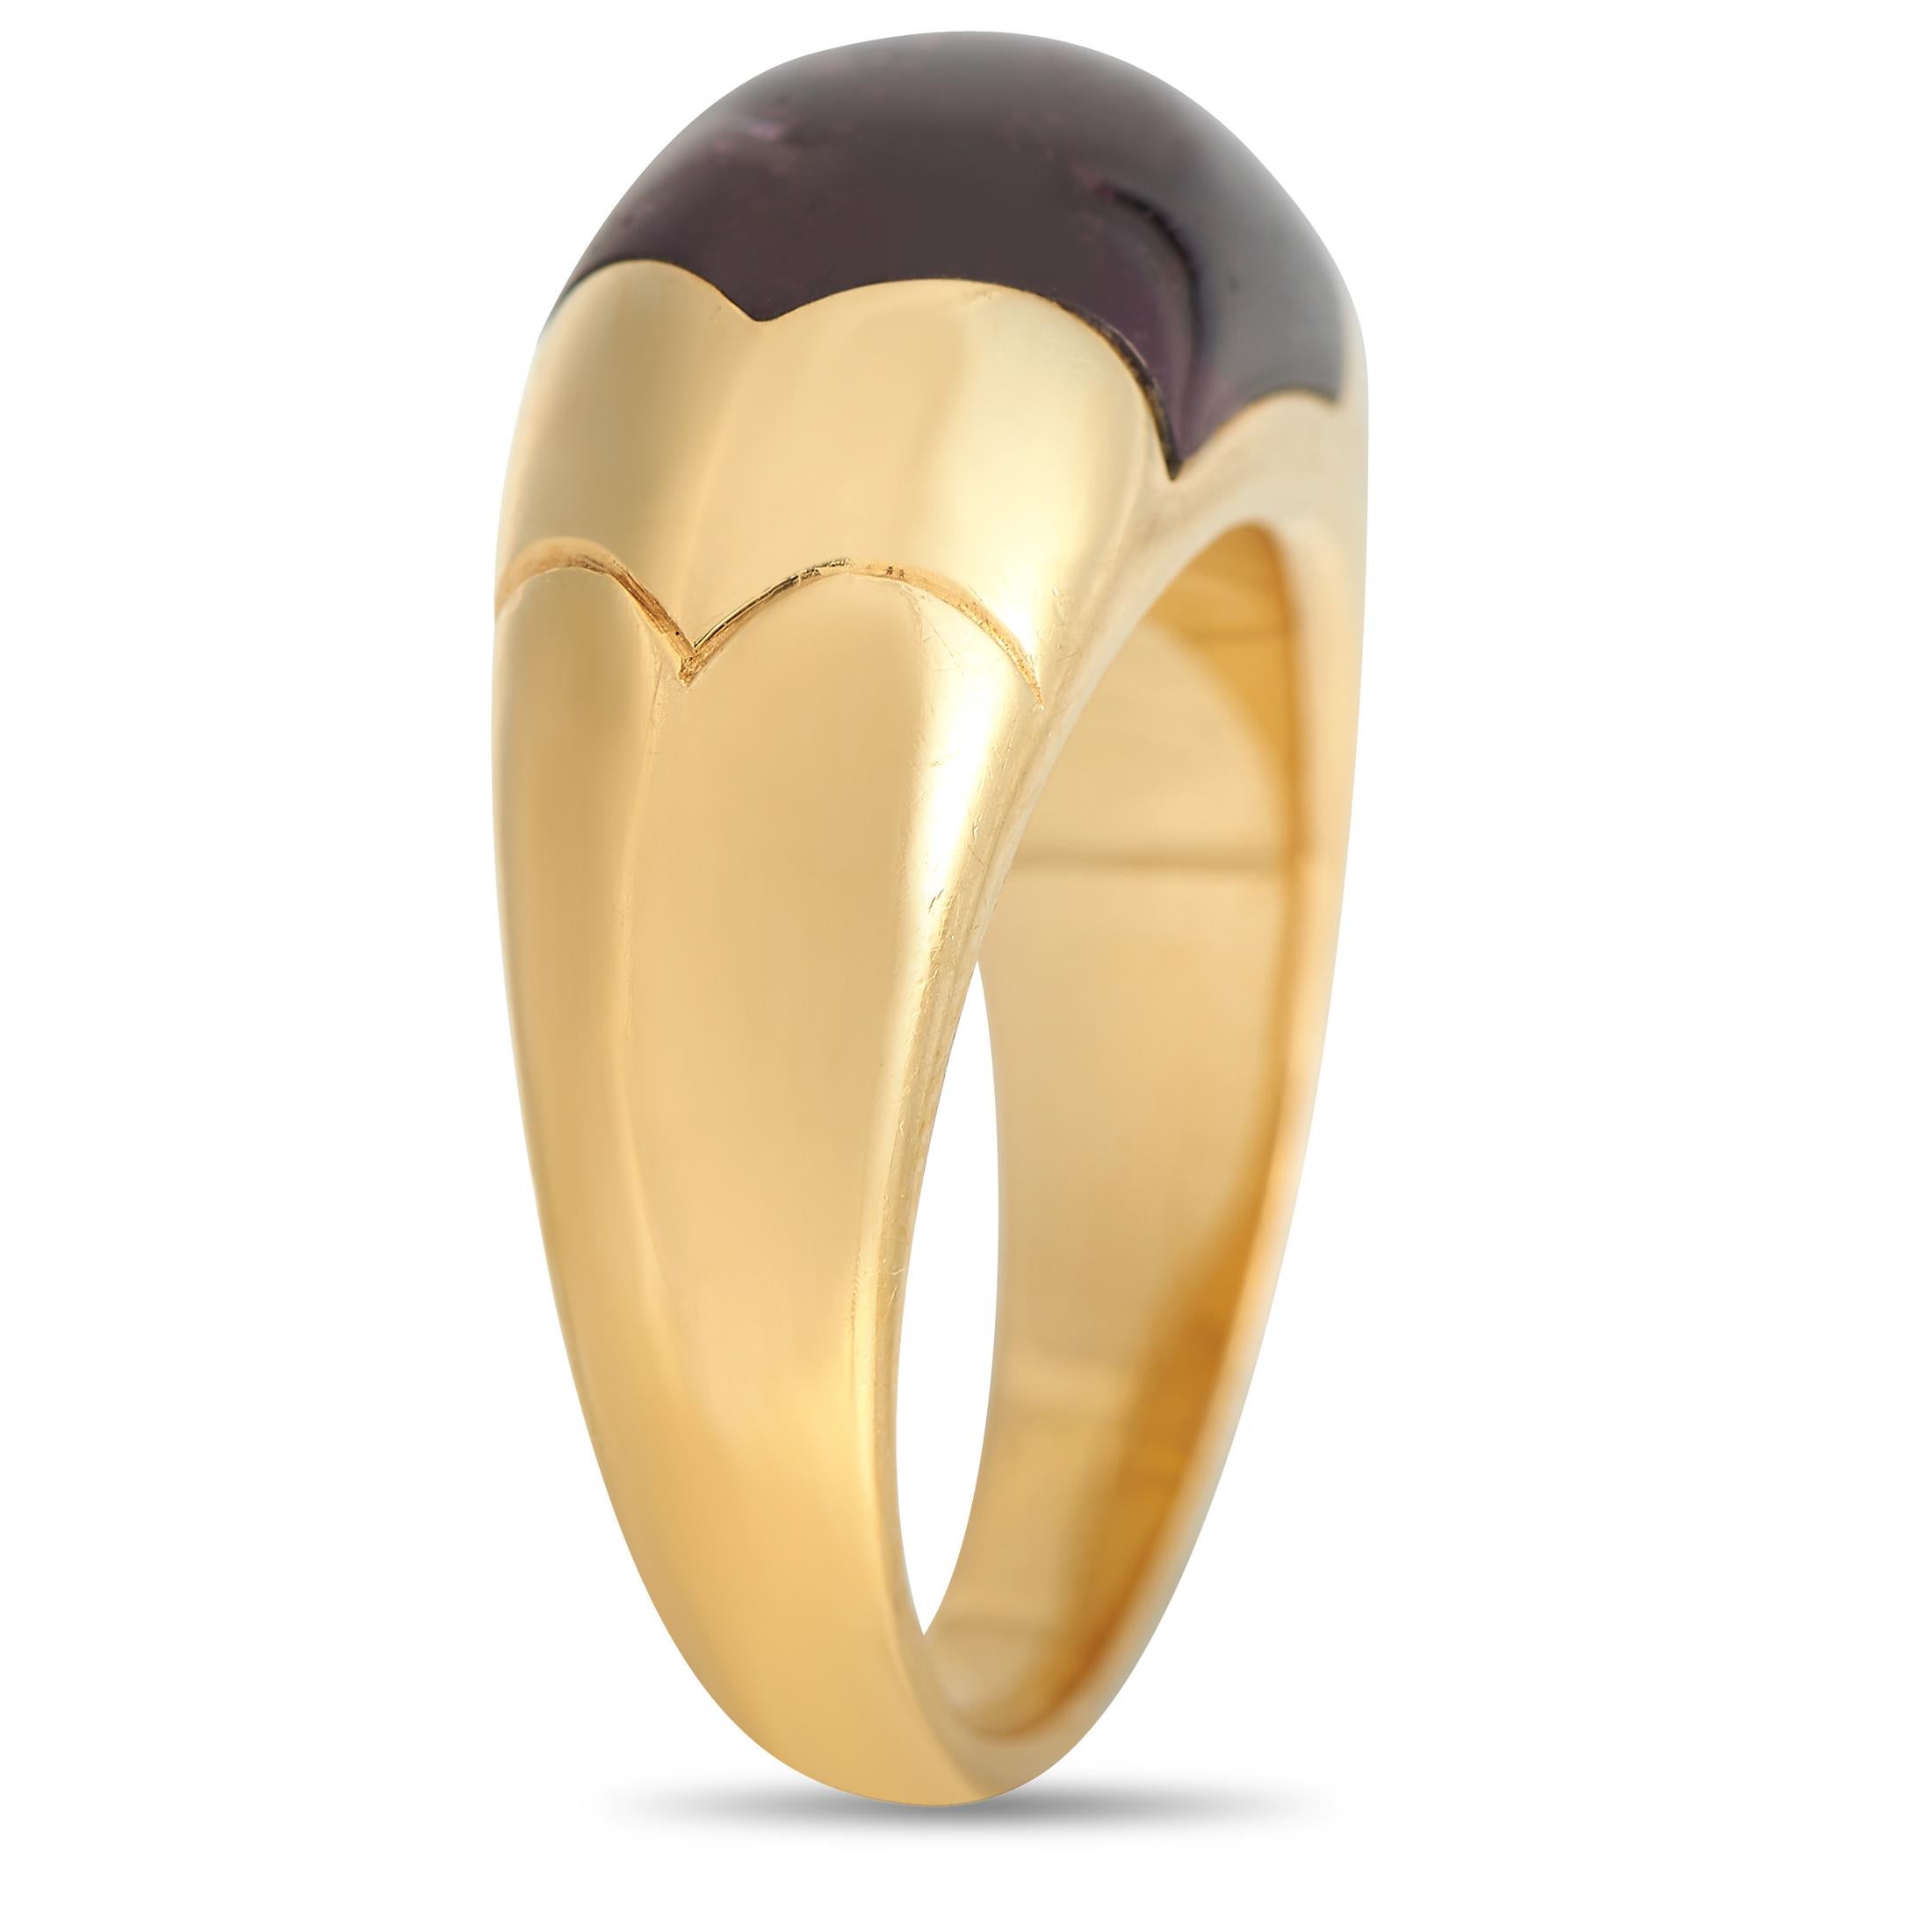 Add a touch of luxury to your everyday style with this Bvlgari Tronchetto 18K Yellow Gold Tourmaline Ring. It features a domed band in solid 18K yellow gold with a deep red tourmaline inlay. The ring's top dimensions measure 6mm by 15mm.This Bvlgari